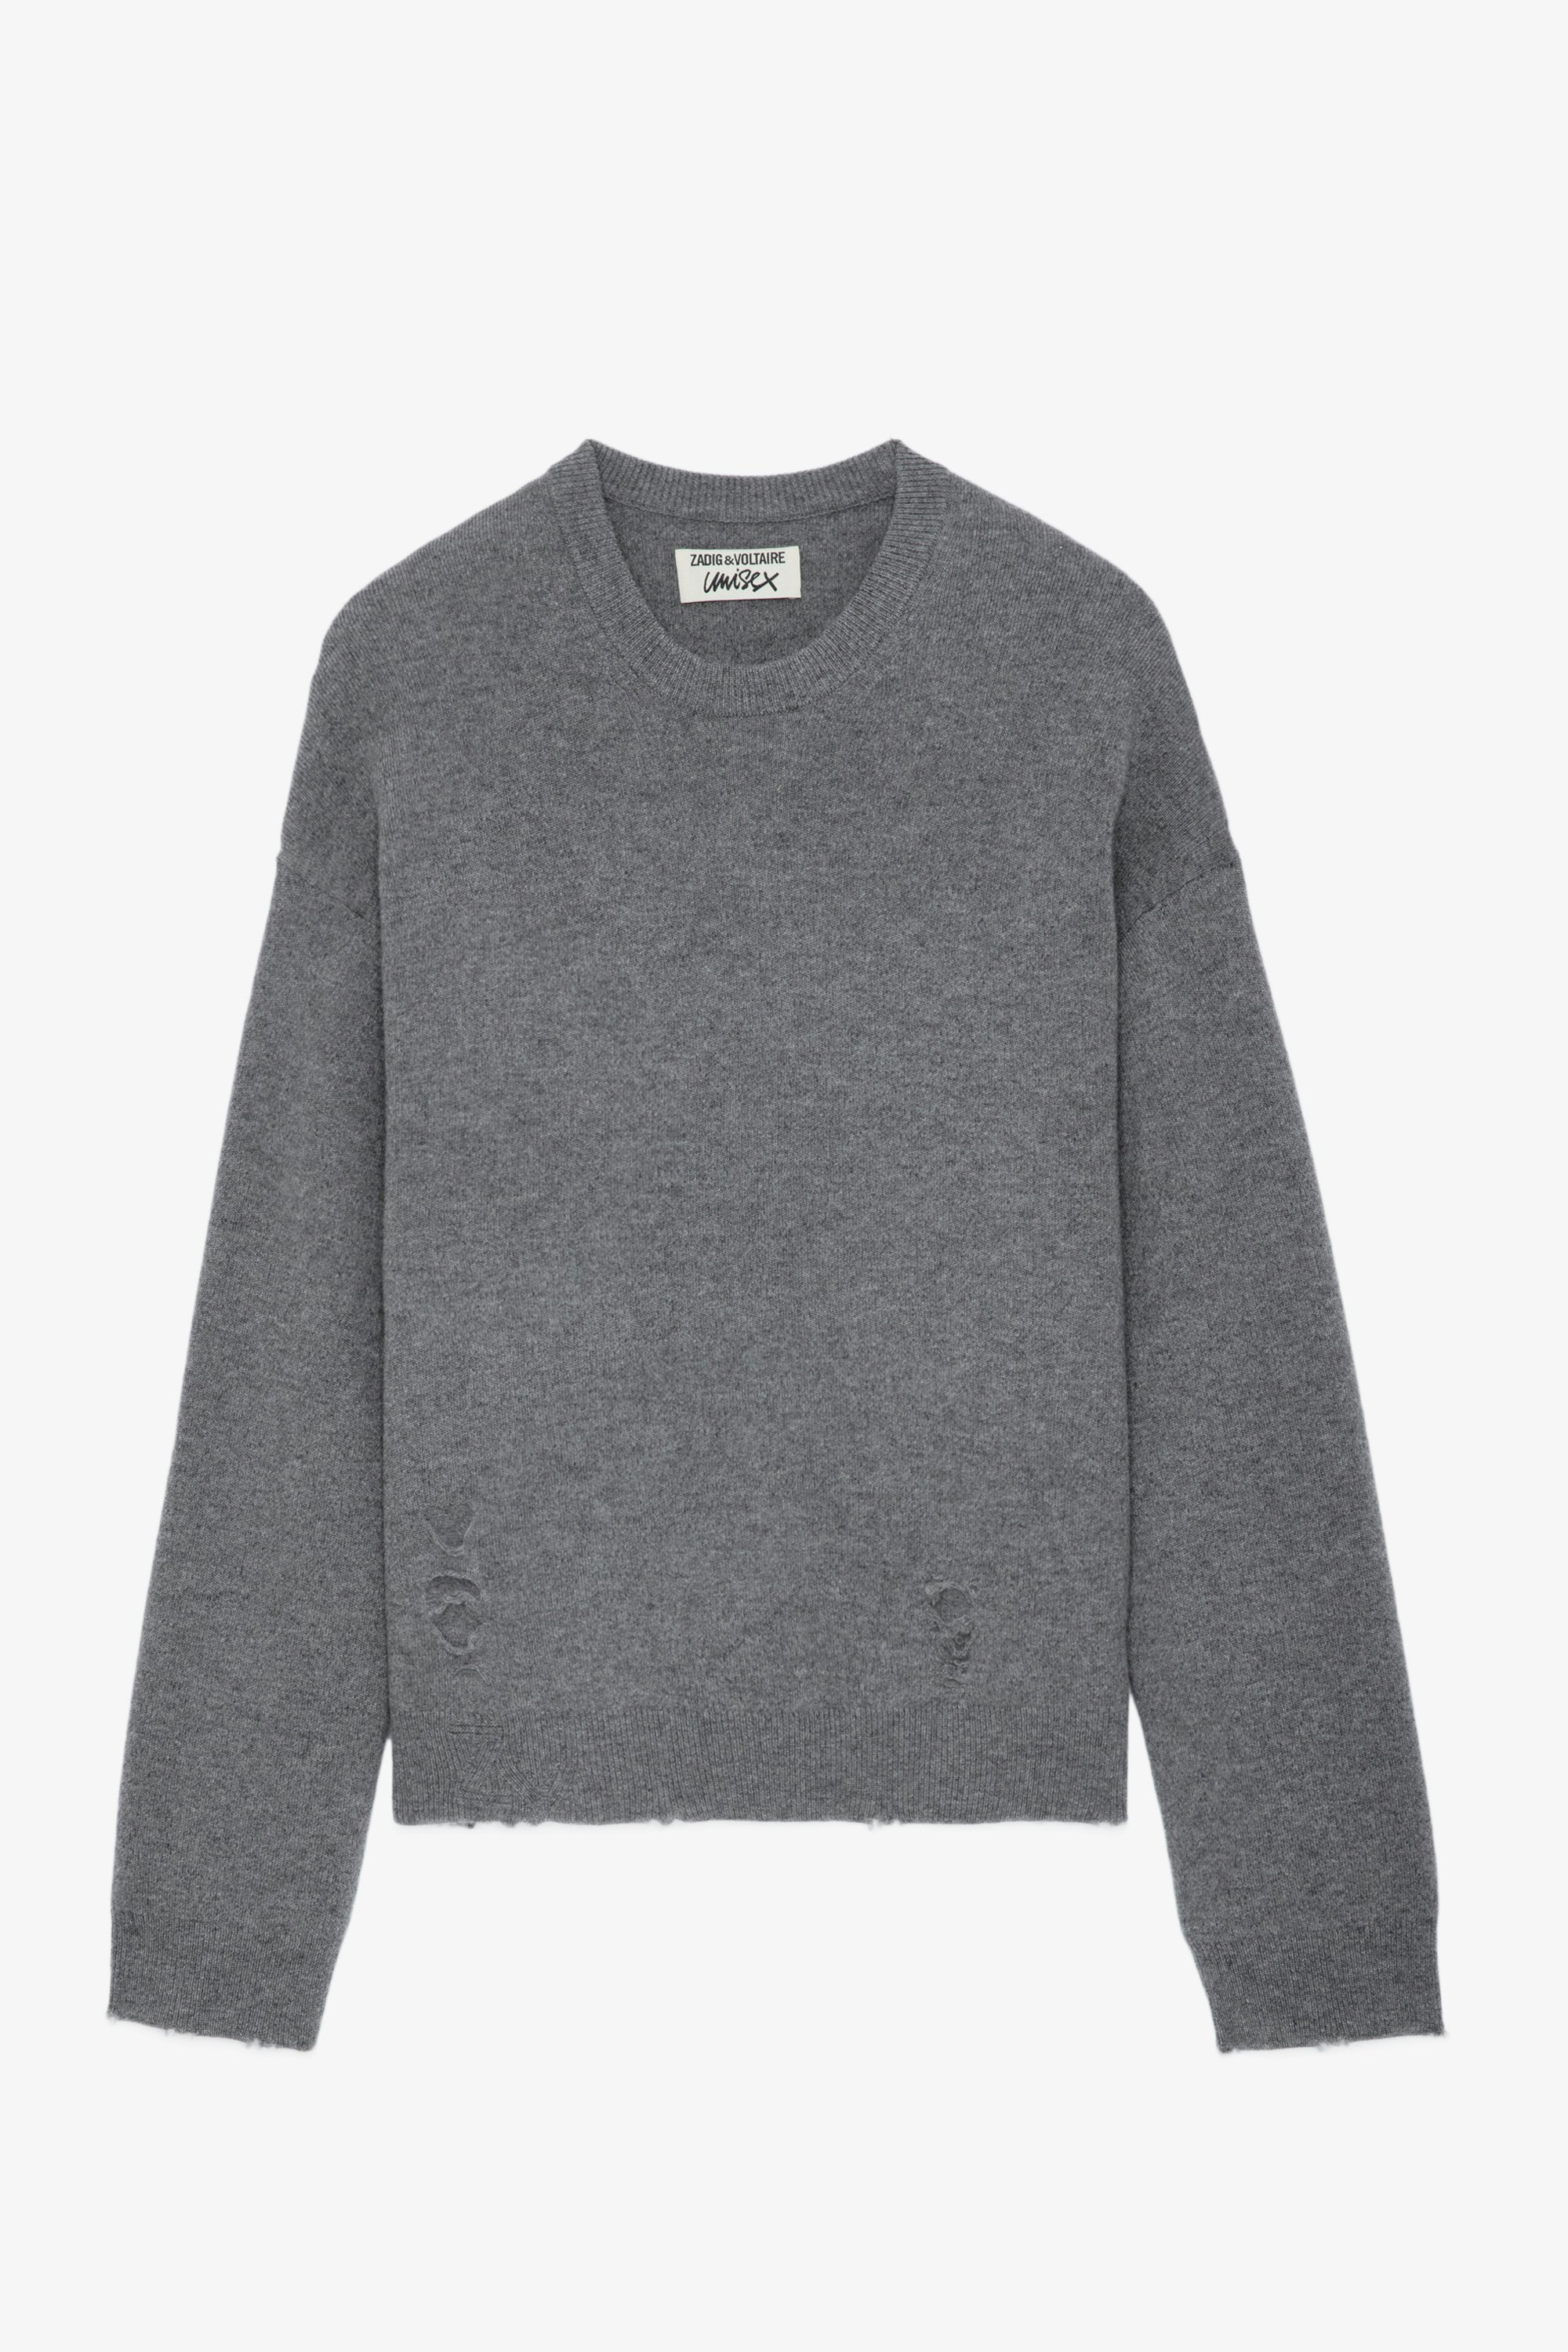 Marko Jumper - Grey distressed-effect wool jumper with long sleeves and round neckline.